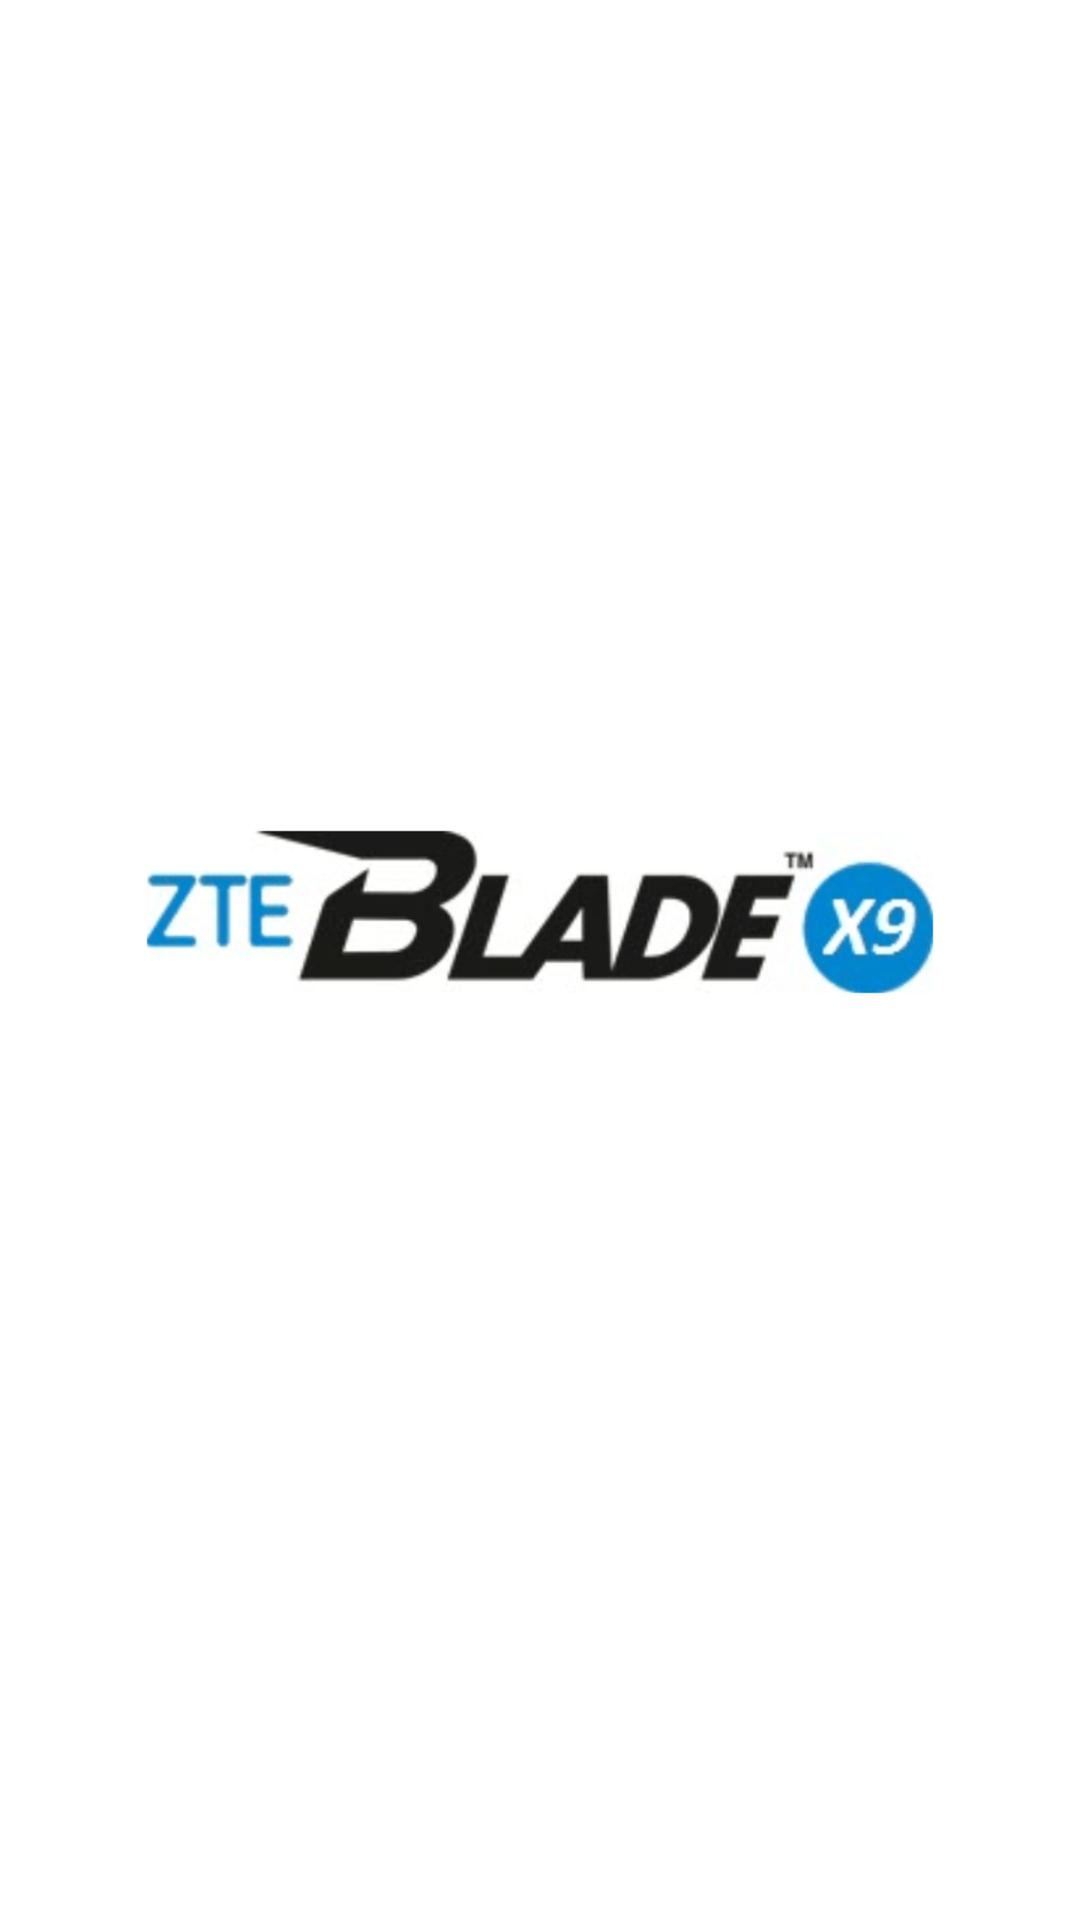 ZTE Logo - GUIDE] How to Change Boot Logo (Splash Scre… | Android Development ...